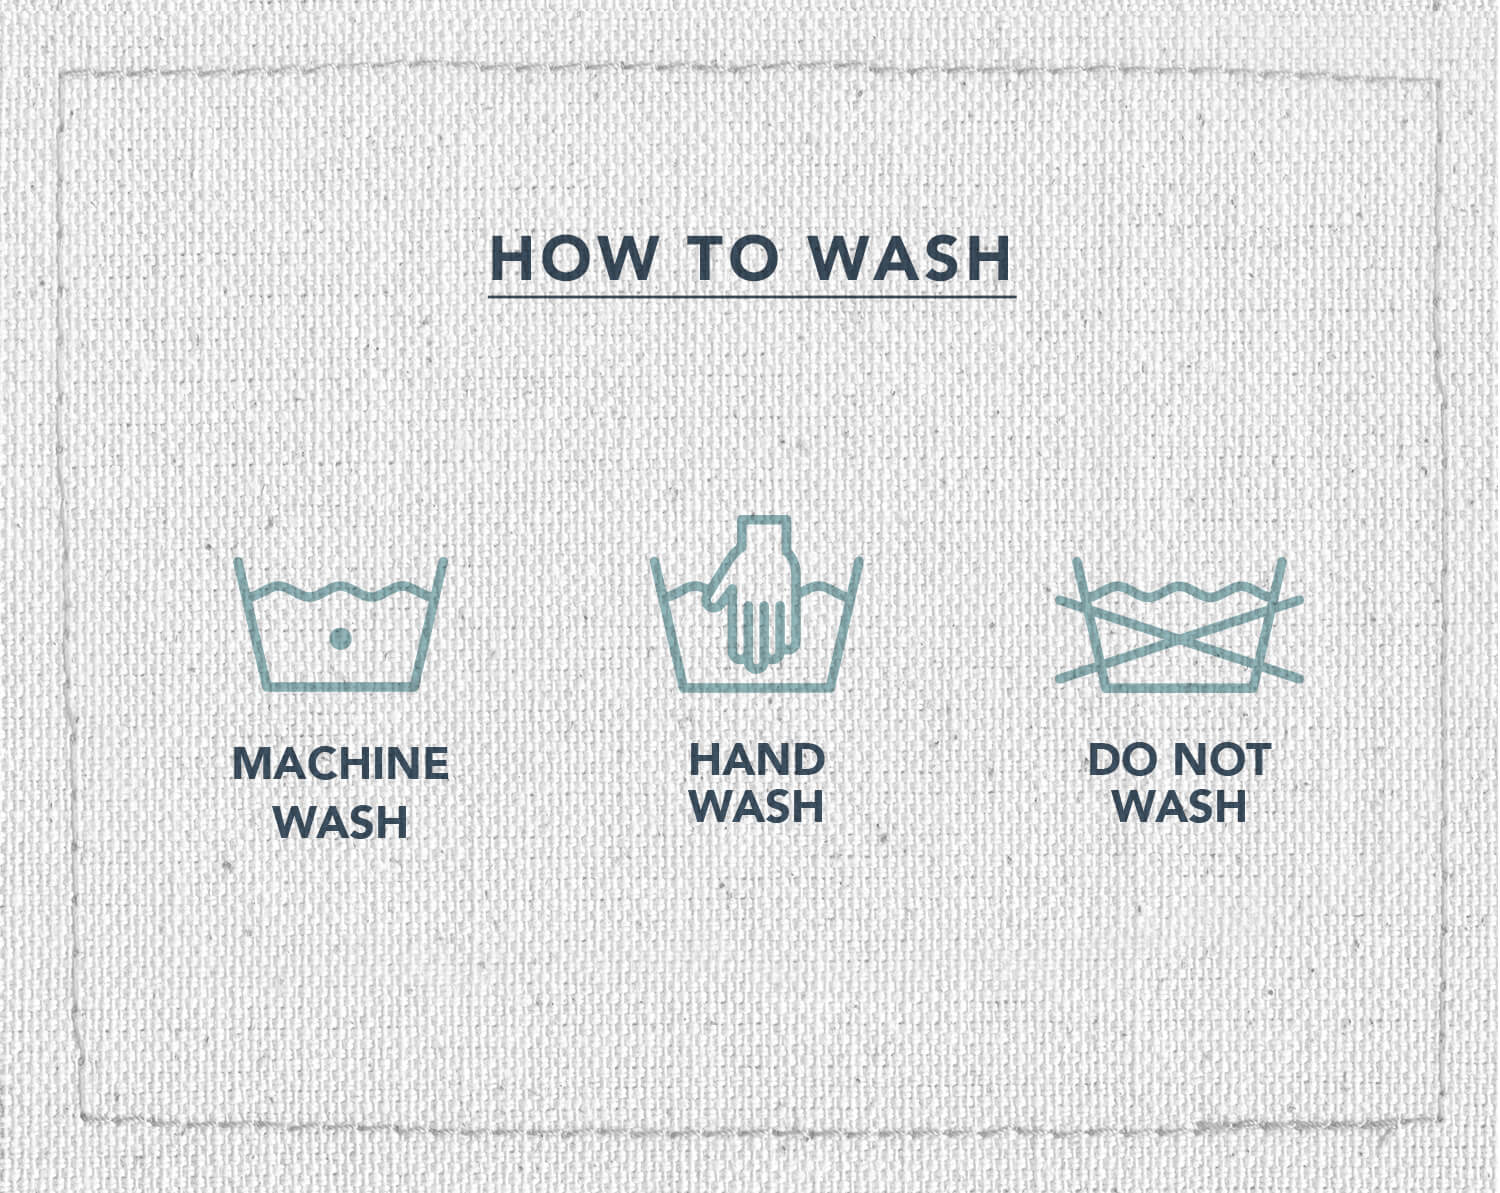 An infographic of three laundry care symbols, indicating what symbol means machine wash, hand wash, and do not wash